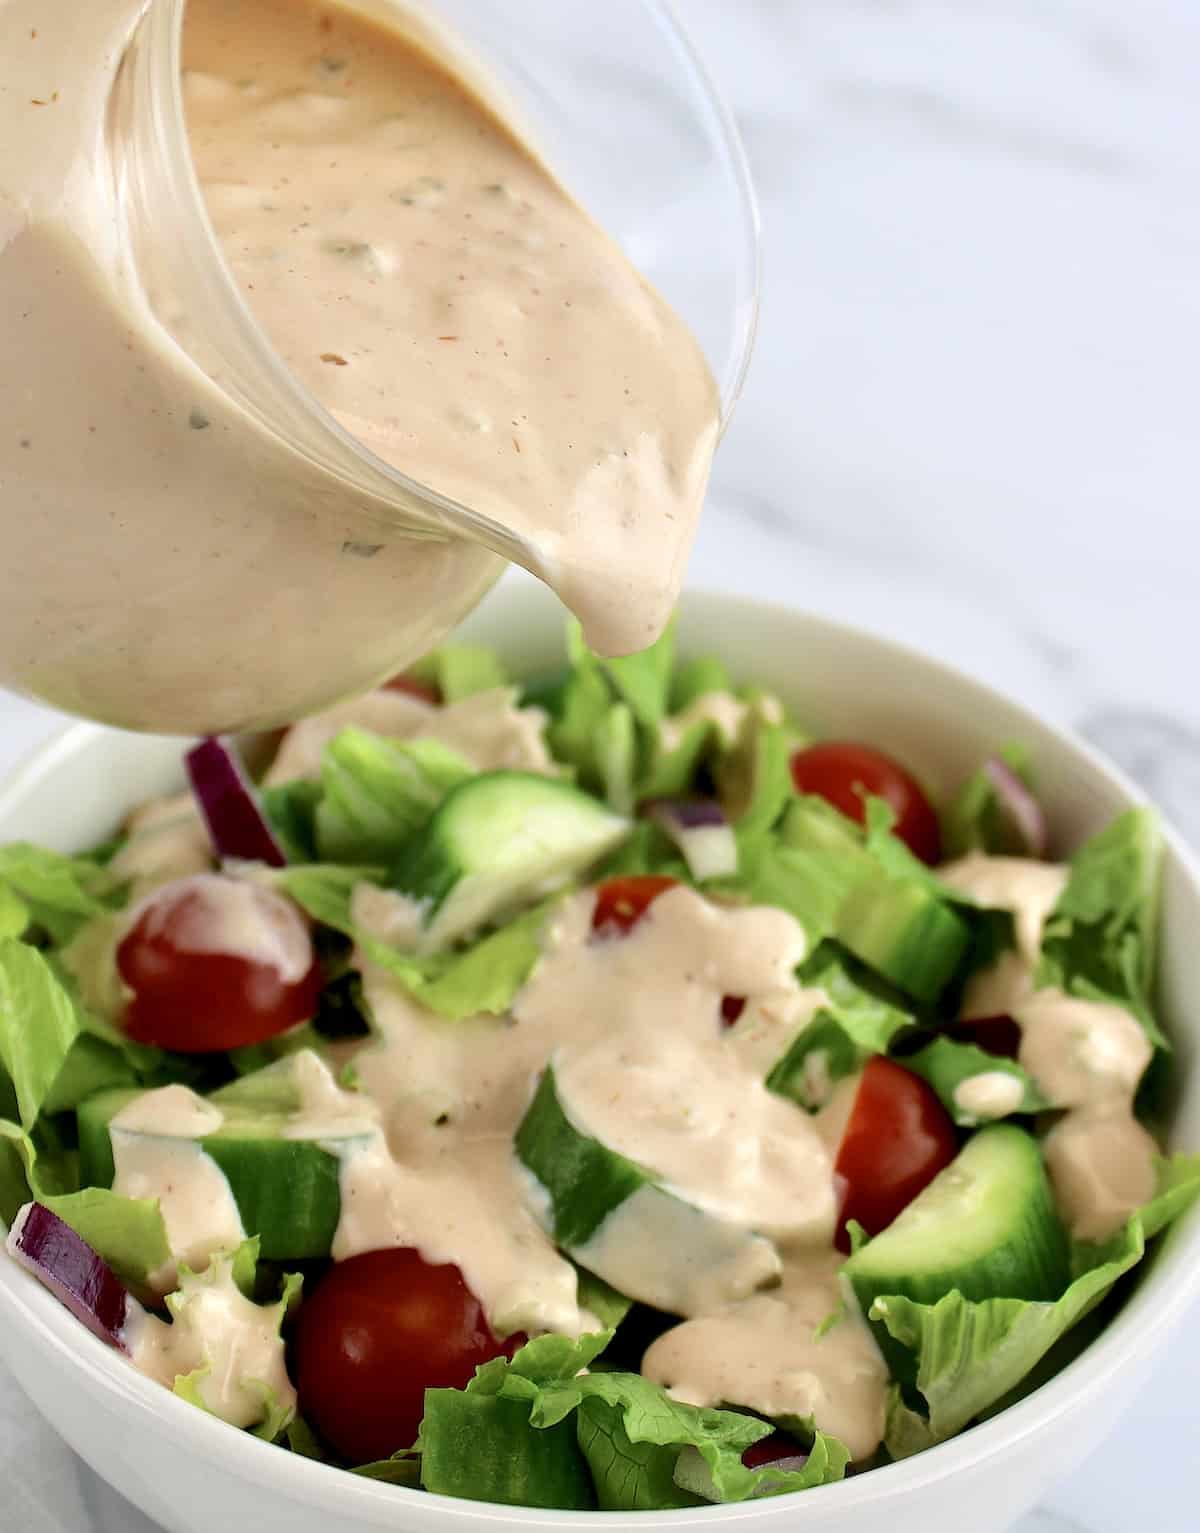 Thousand Island Dressing being poured over a salad